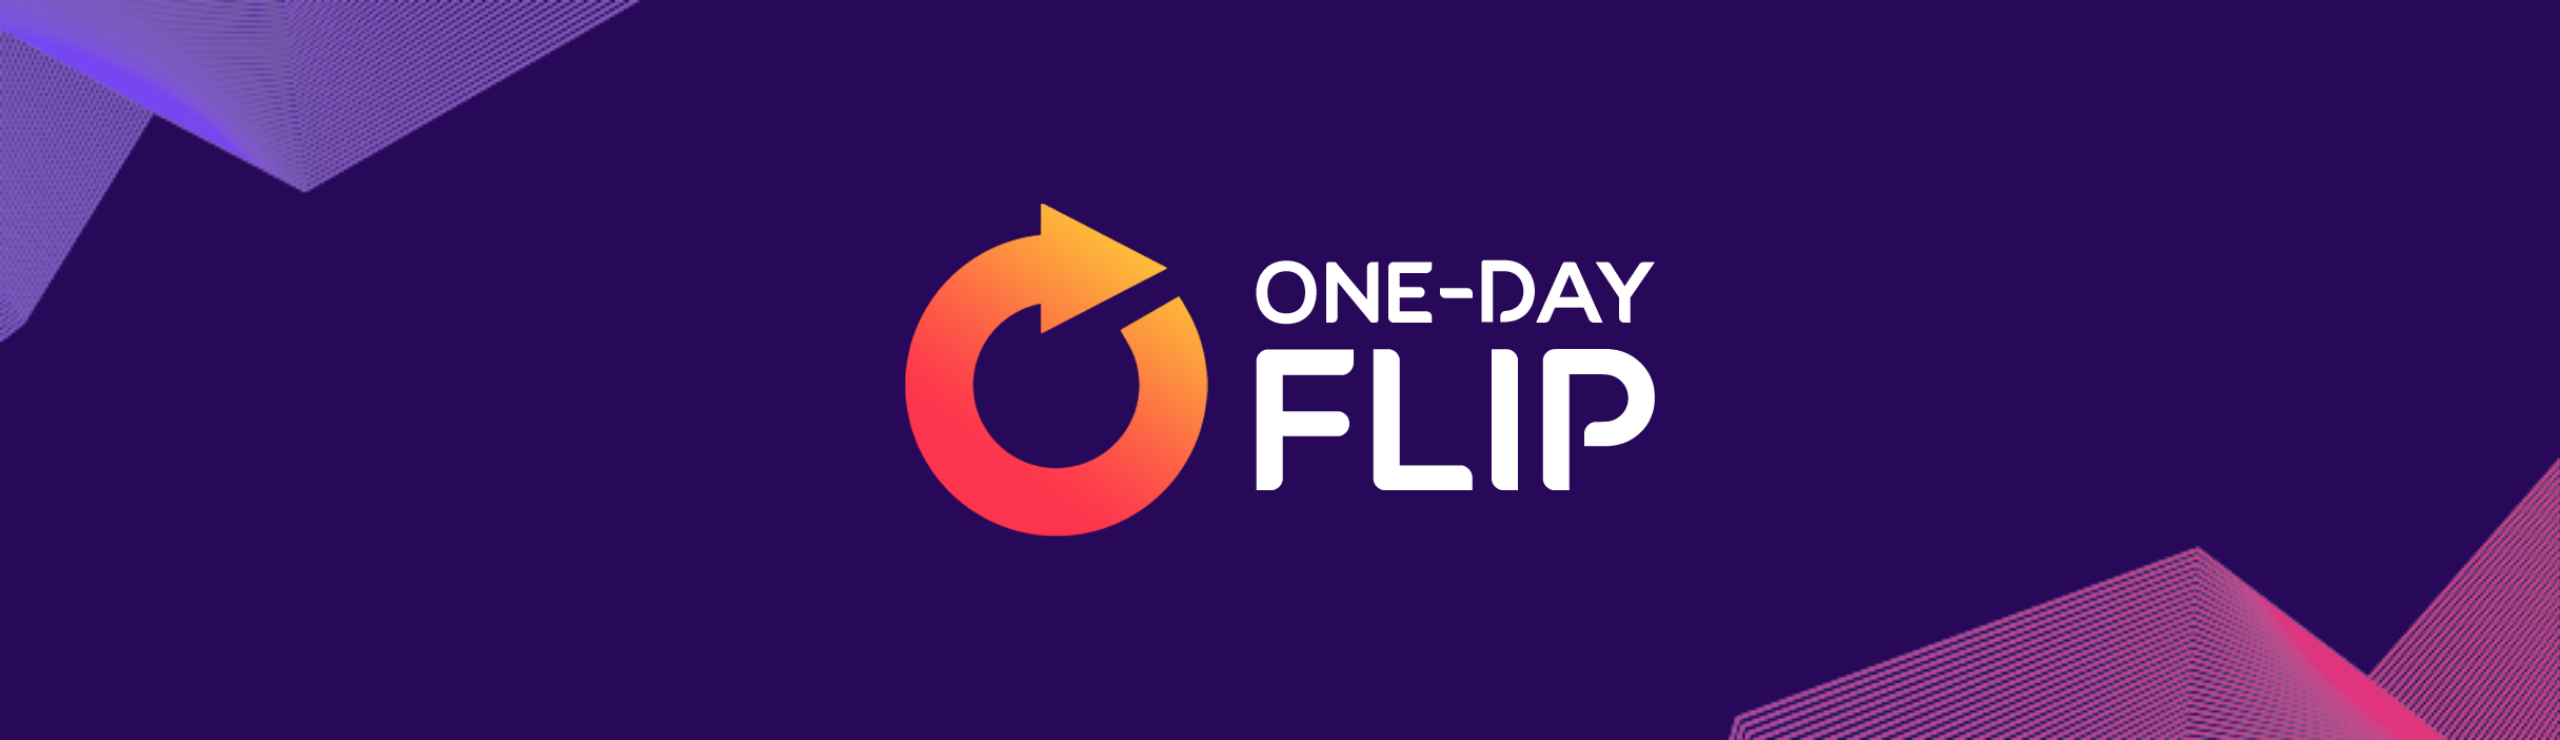 Announcing: “One-Day Flip” by Cameron Dunlap